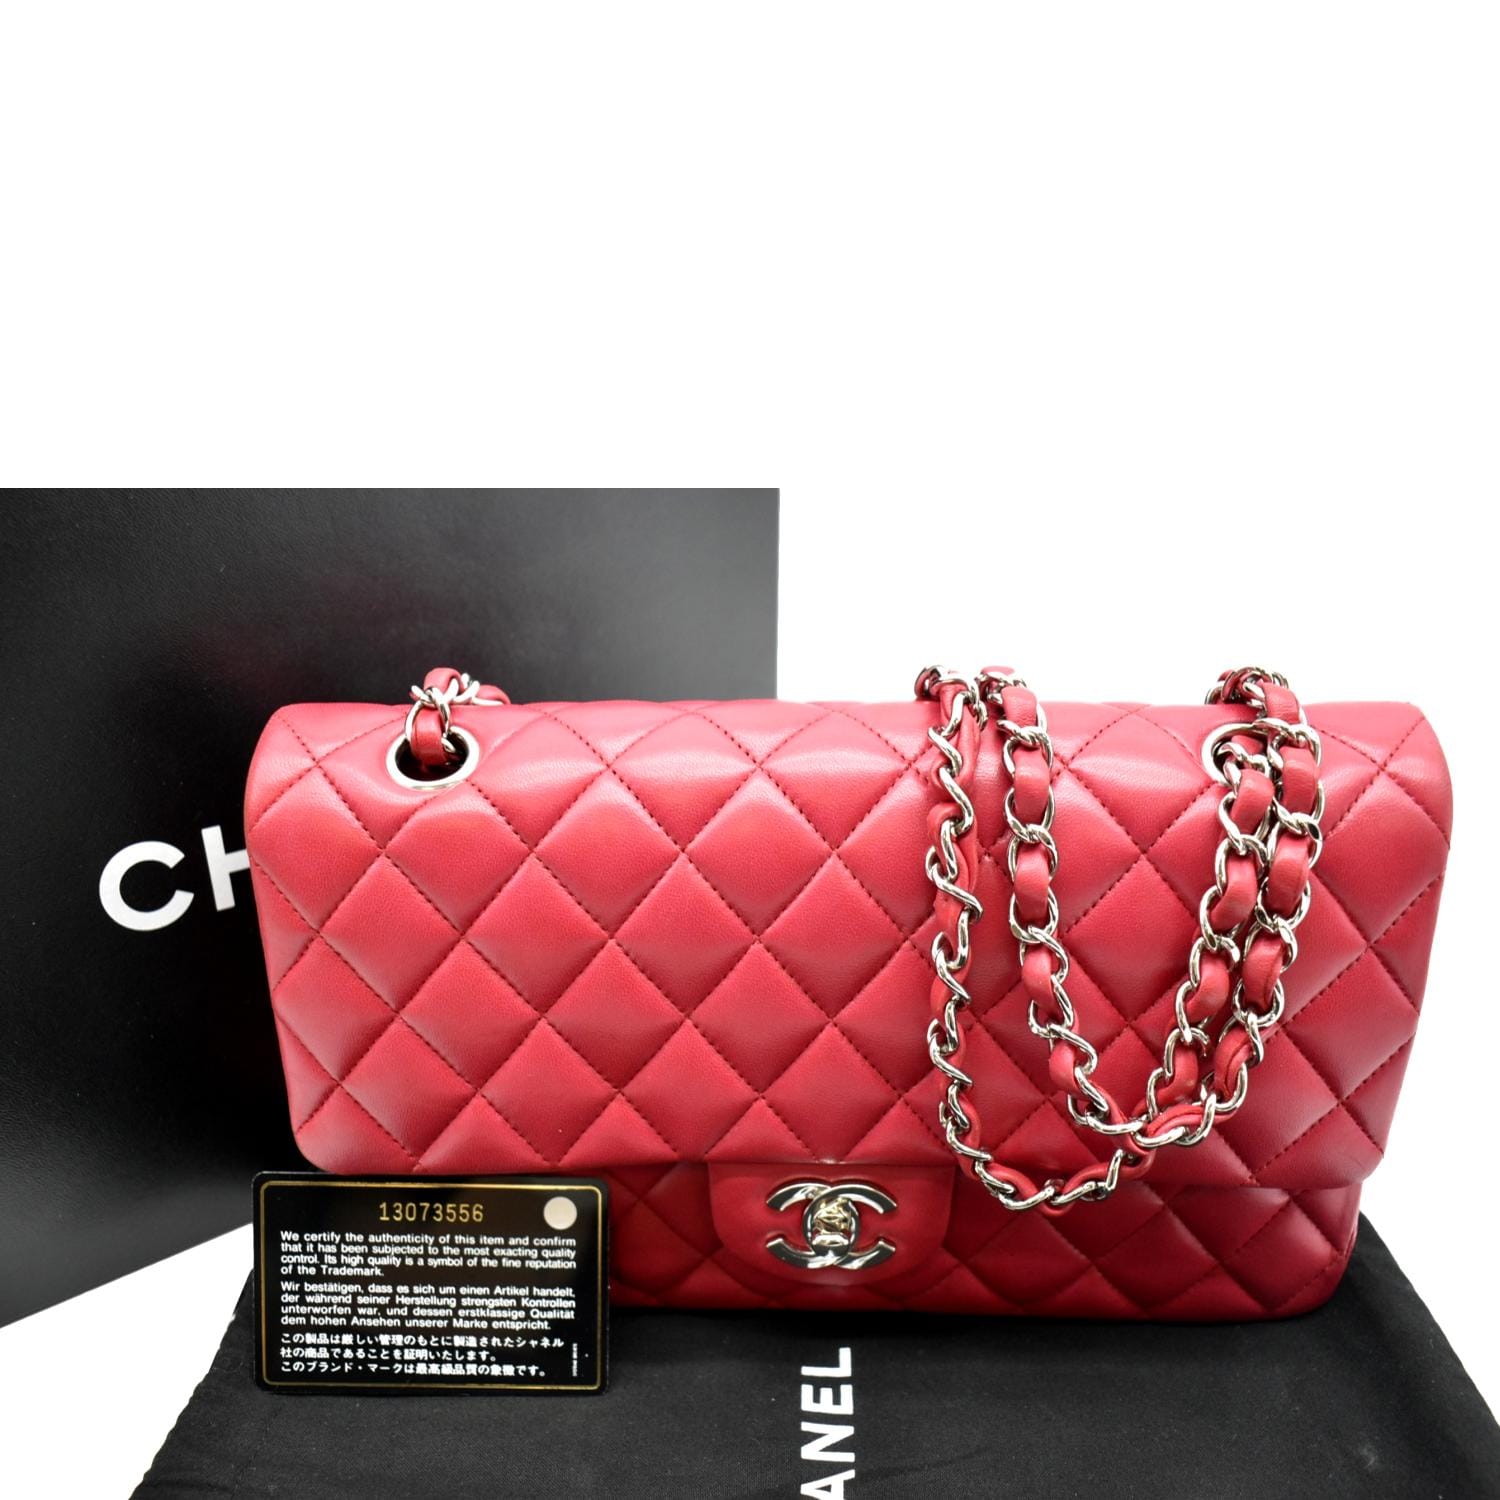 Chanel Red Quilted Lambskin Leather Medium Classic Double Flap Bag Chanel